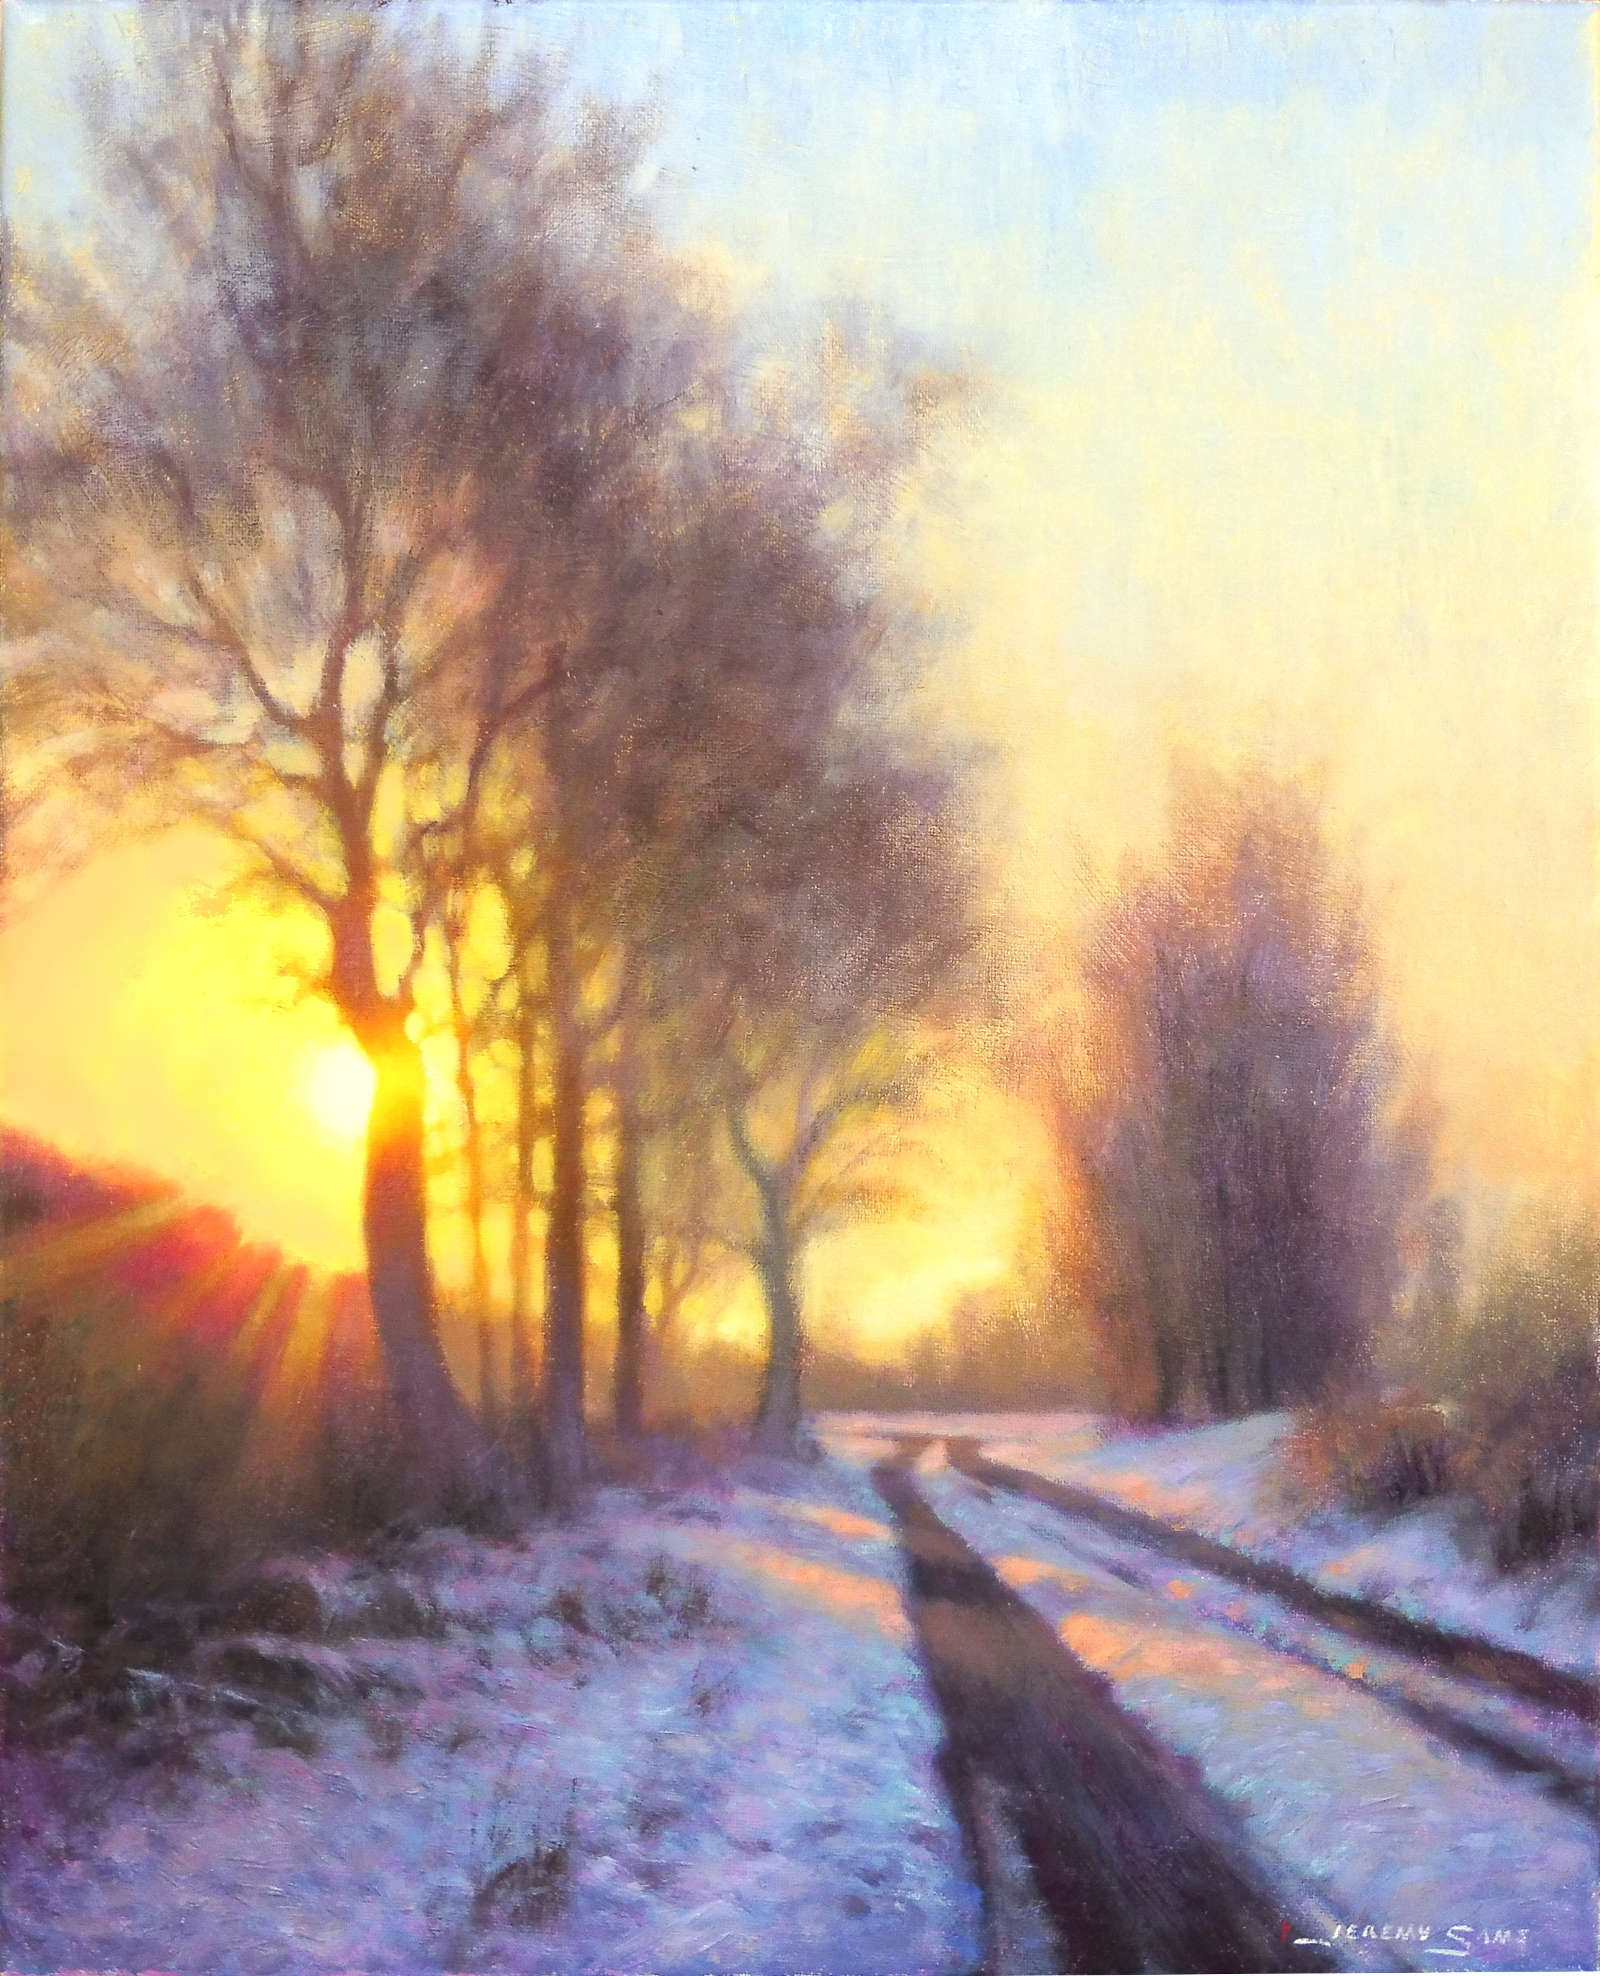 painting of light shining through trees in the snow